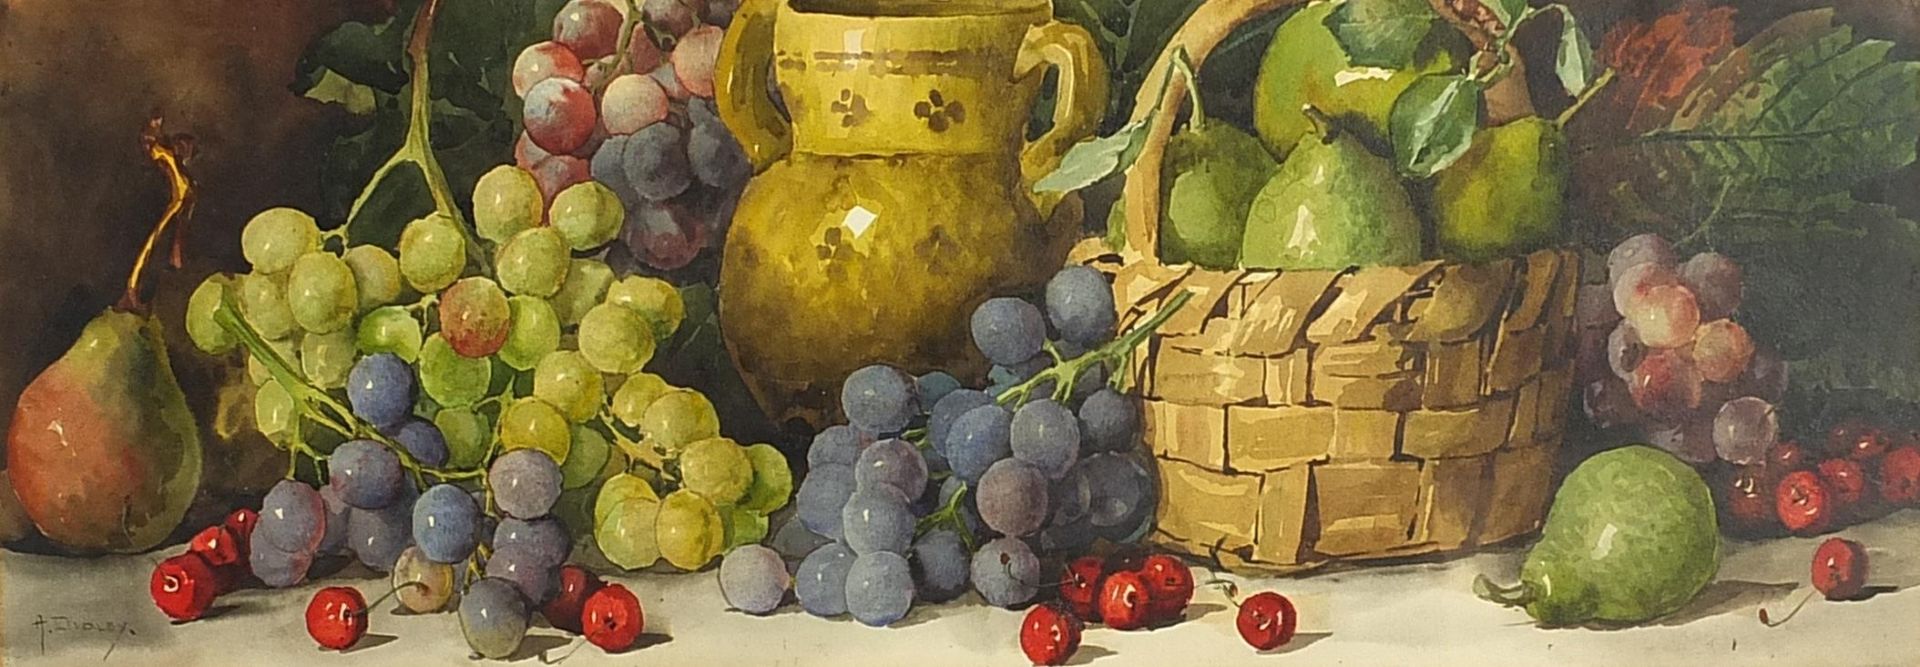 Arthur Dudley - Still life fruit and vessels, 19th century watercolour, mounted, framed and